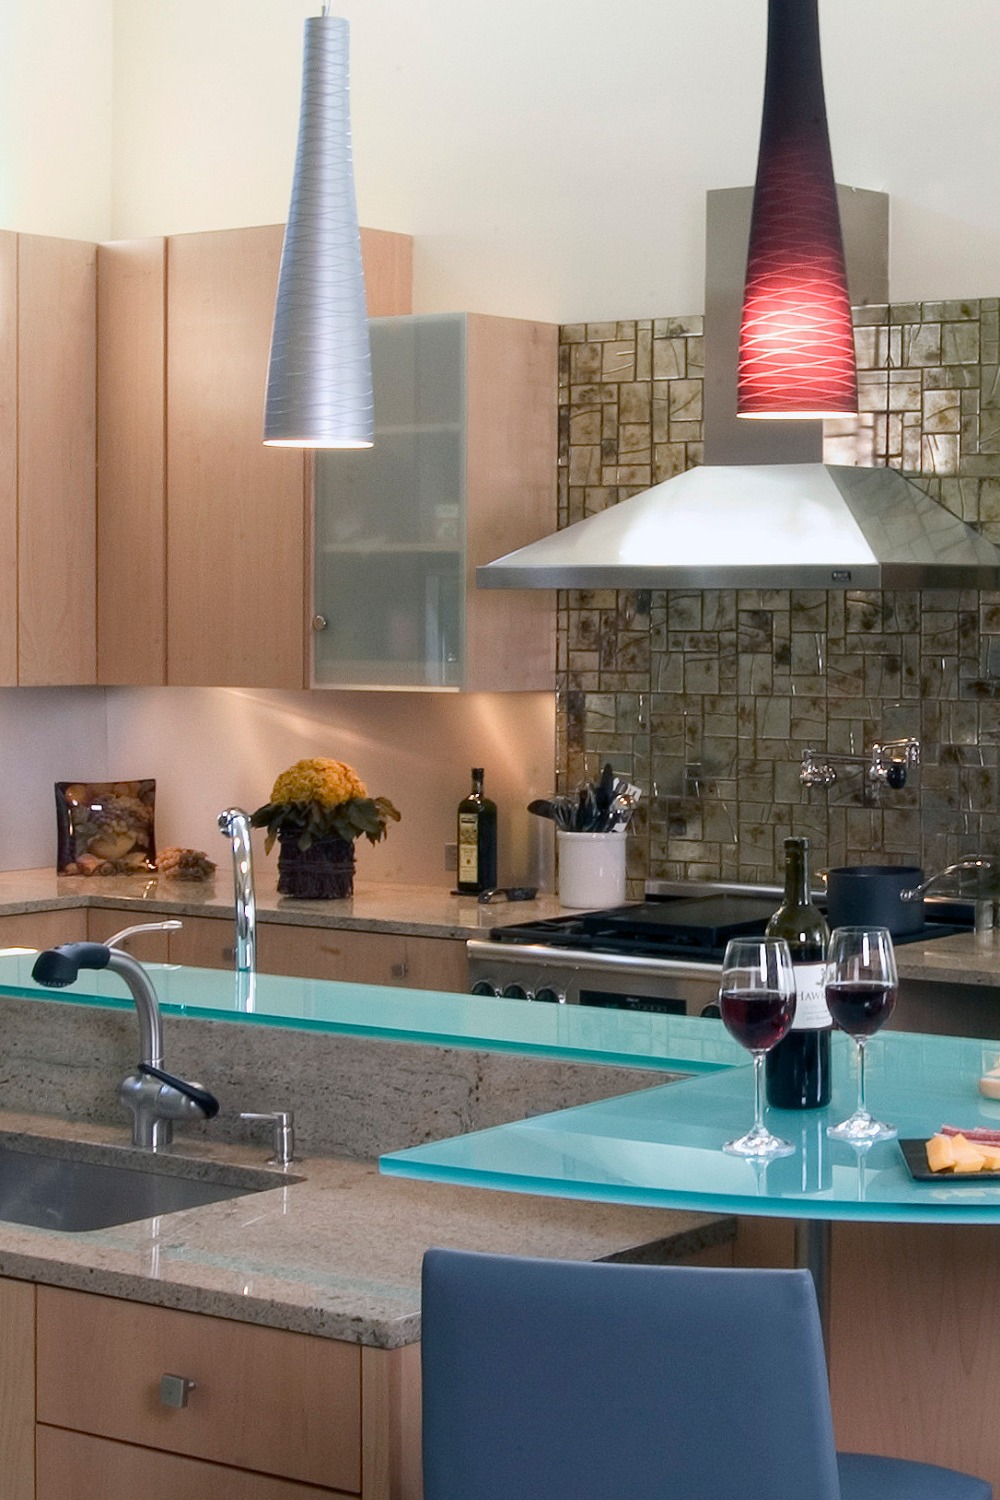 Broad Range Glass Countertop Glass Countertops Recycled Pieces Design Ideas Busy Kitchens Talking Point